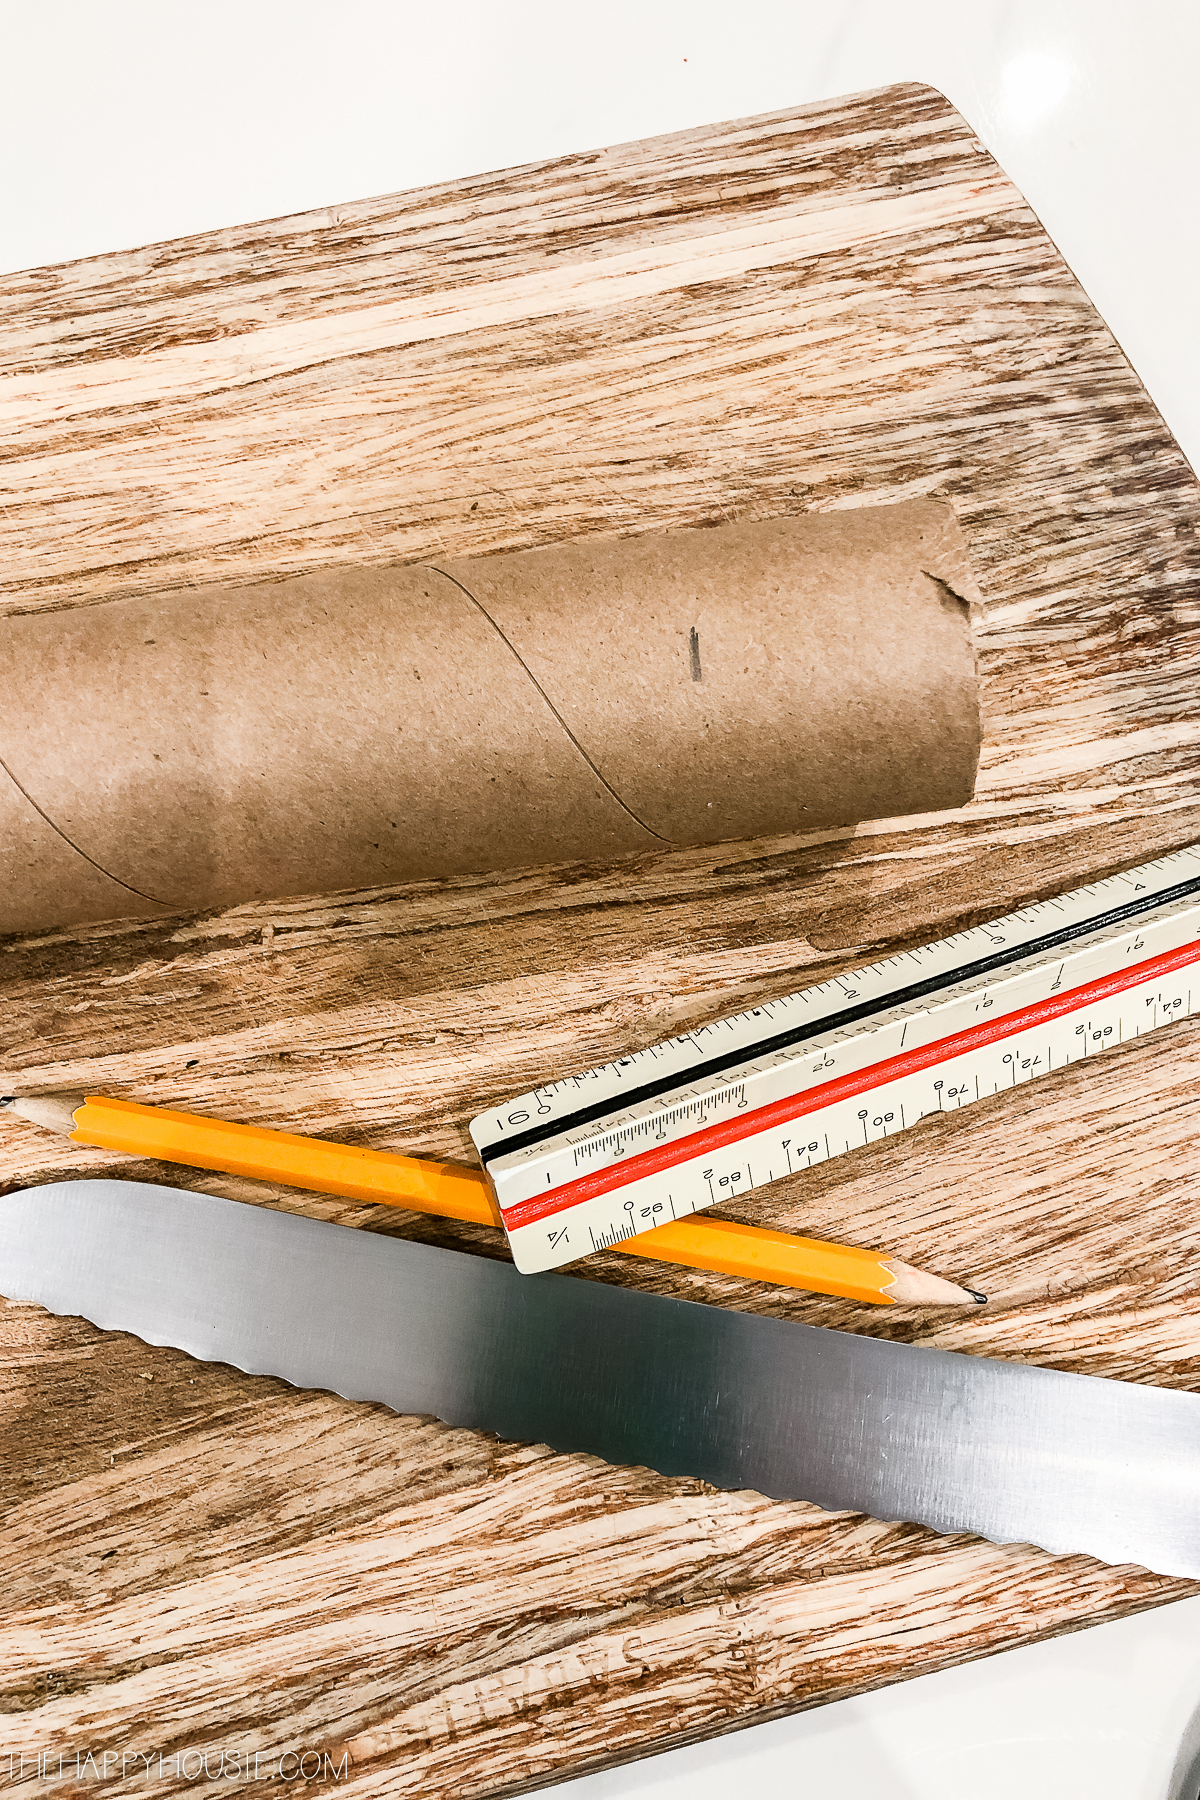 A cardboard roll, knife, pencil and ruler laid out for the tutorial.